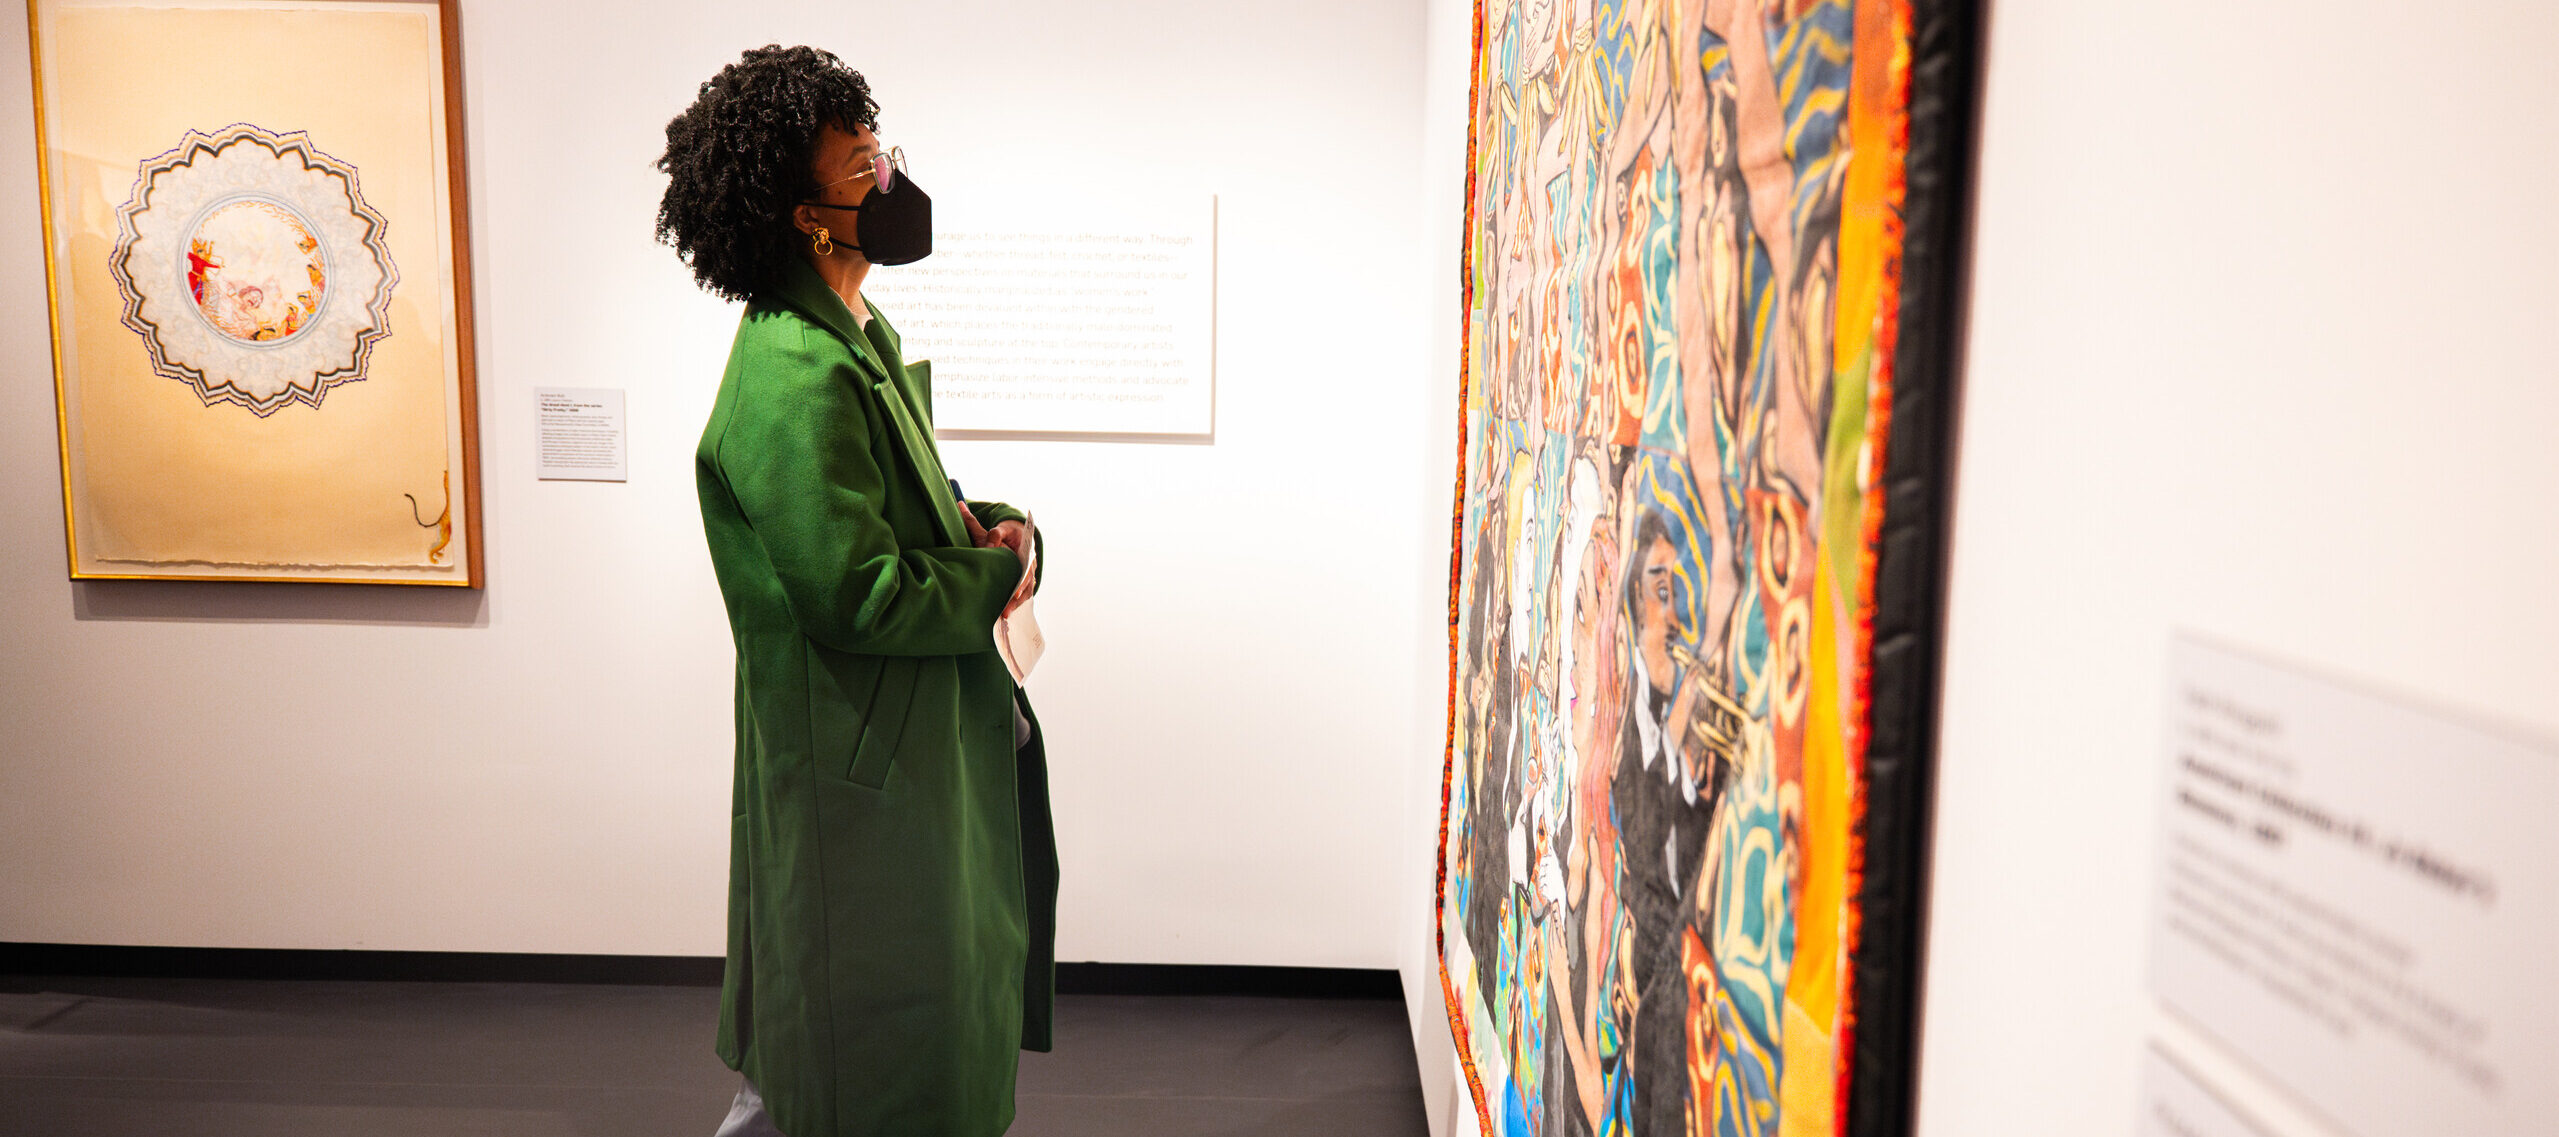 A woman in a green coat looks at a colorful painting